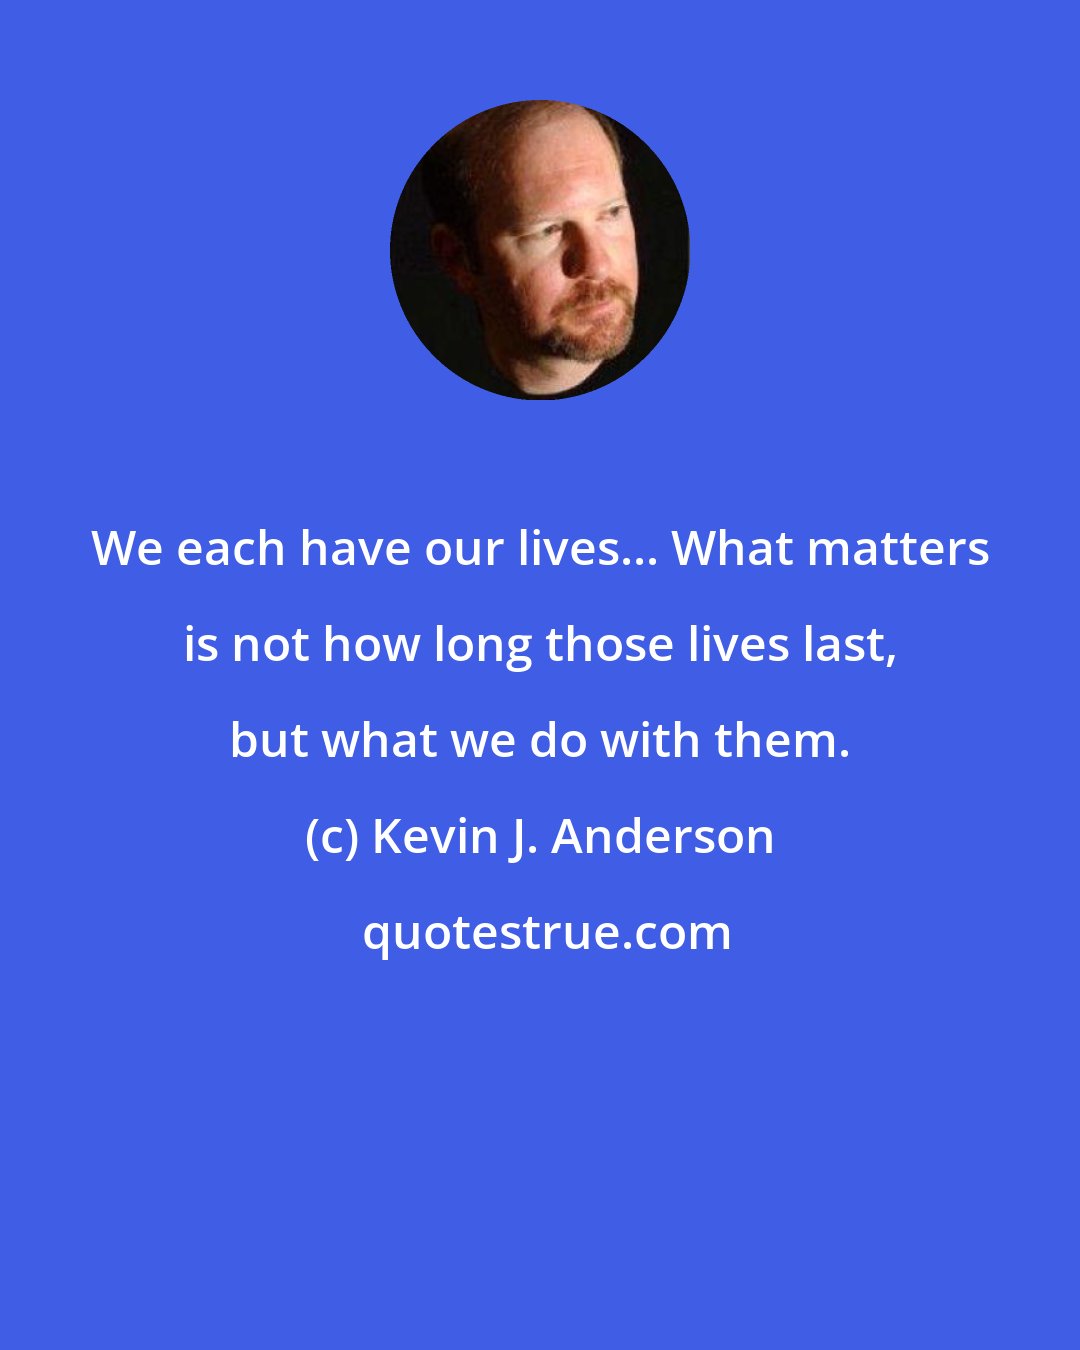 Kevin J. Anderson: We each have our lives... What matters is not how long those lives last, but what we do with them.